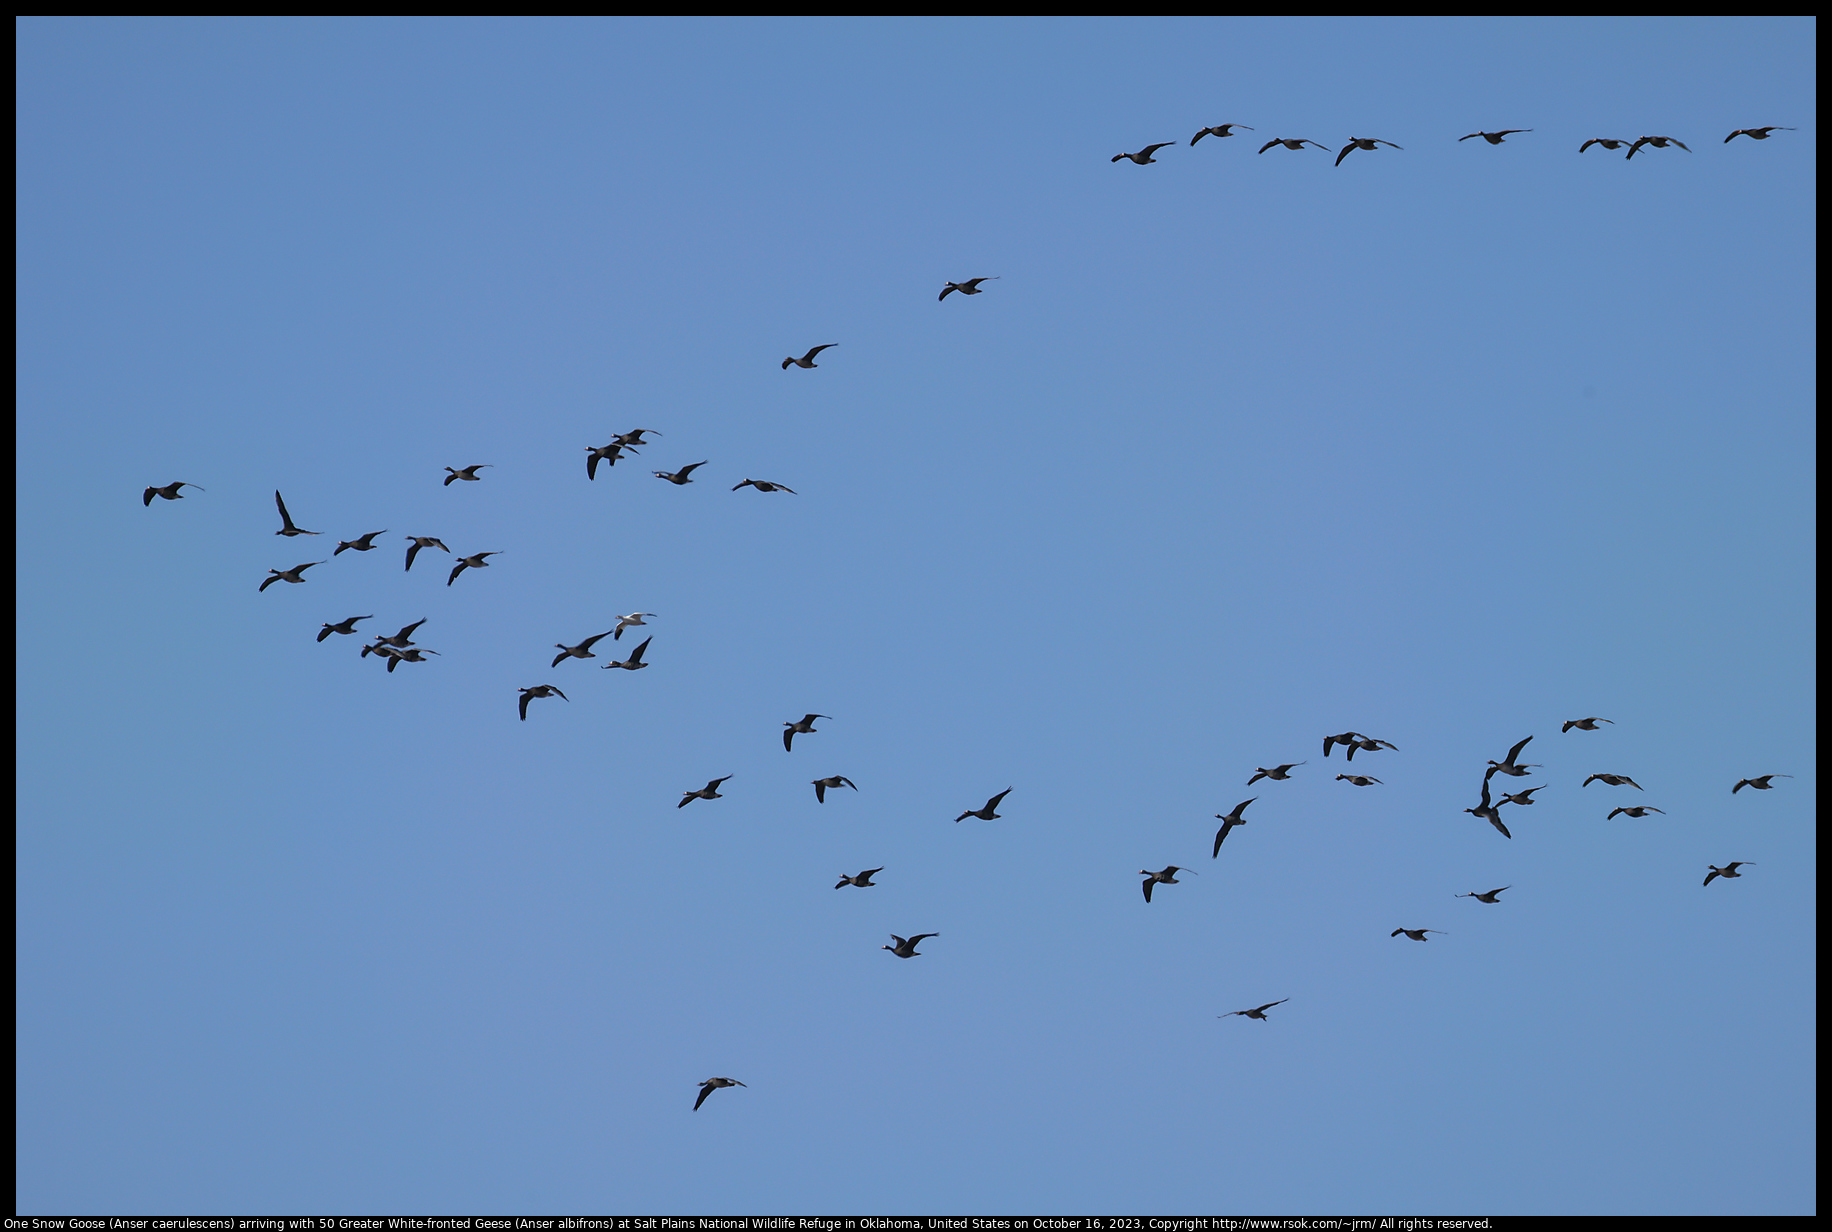 One Snow Goose (Anser caerulescens) arriving with 50 Greater White-fronted Geese (Anser albifrons) at Salt Plains National Wildlife Refuge in Oklahoma, United States on October 16, 2023